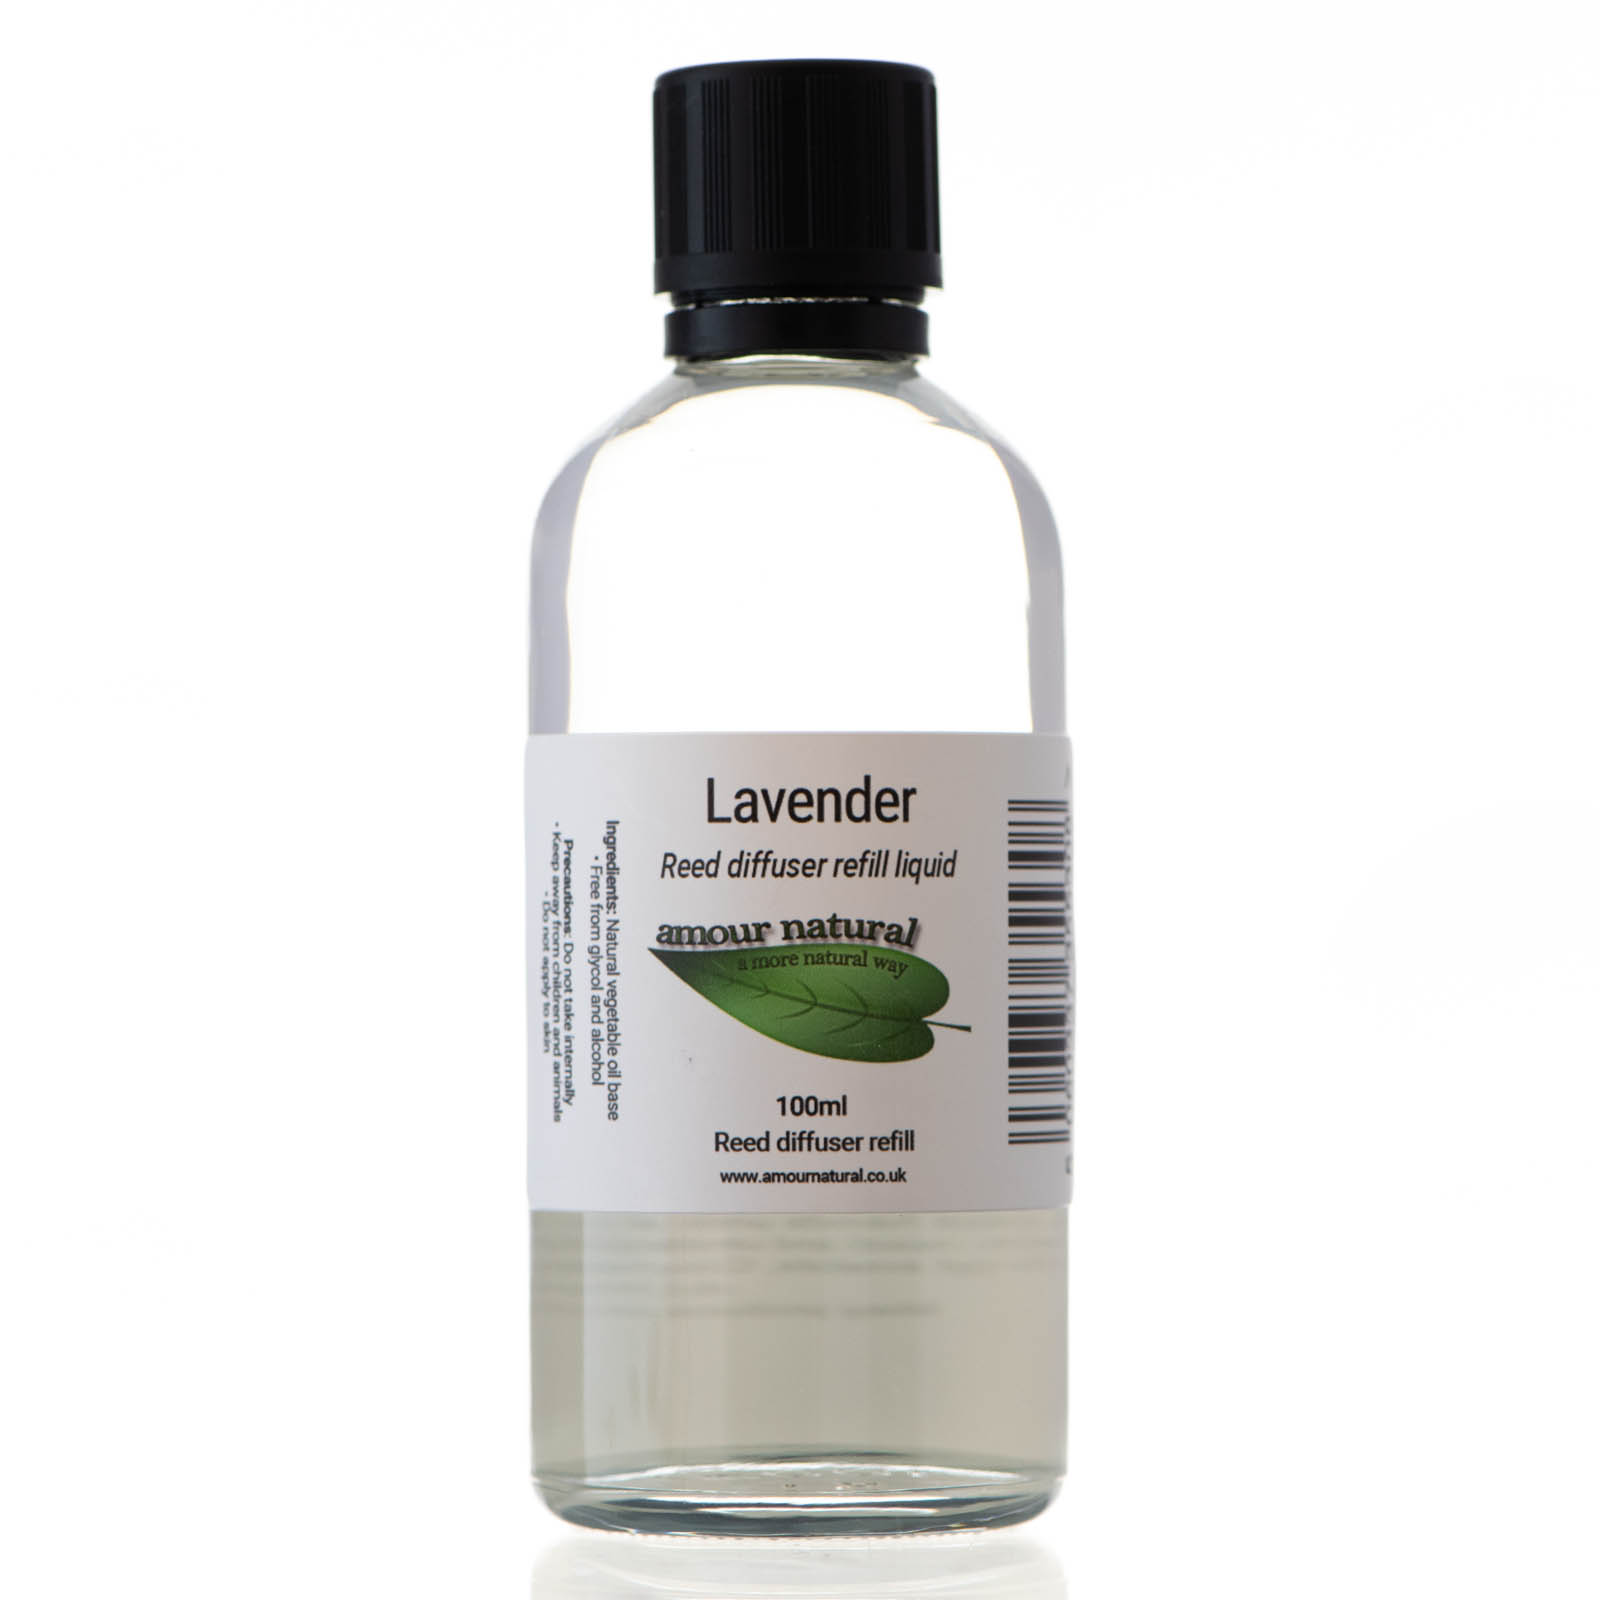 Lavender reed diffuser refill (bottle only)